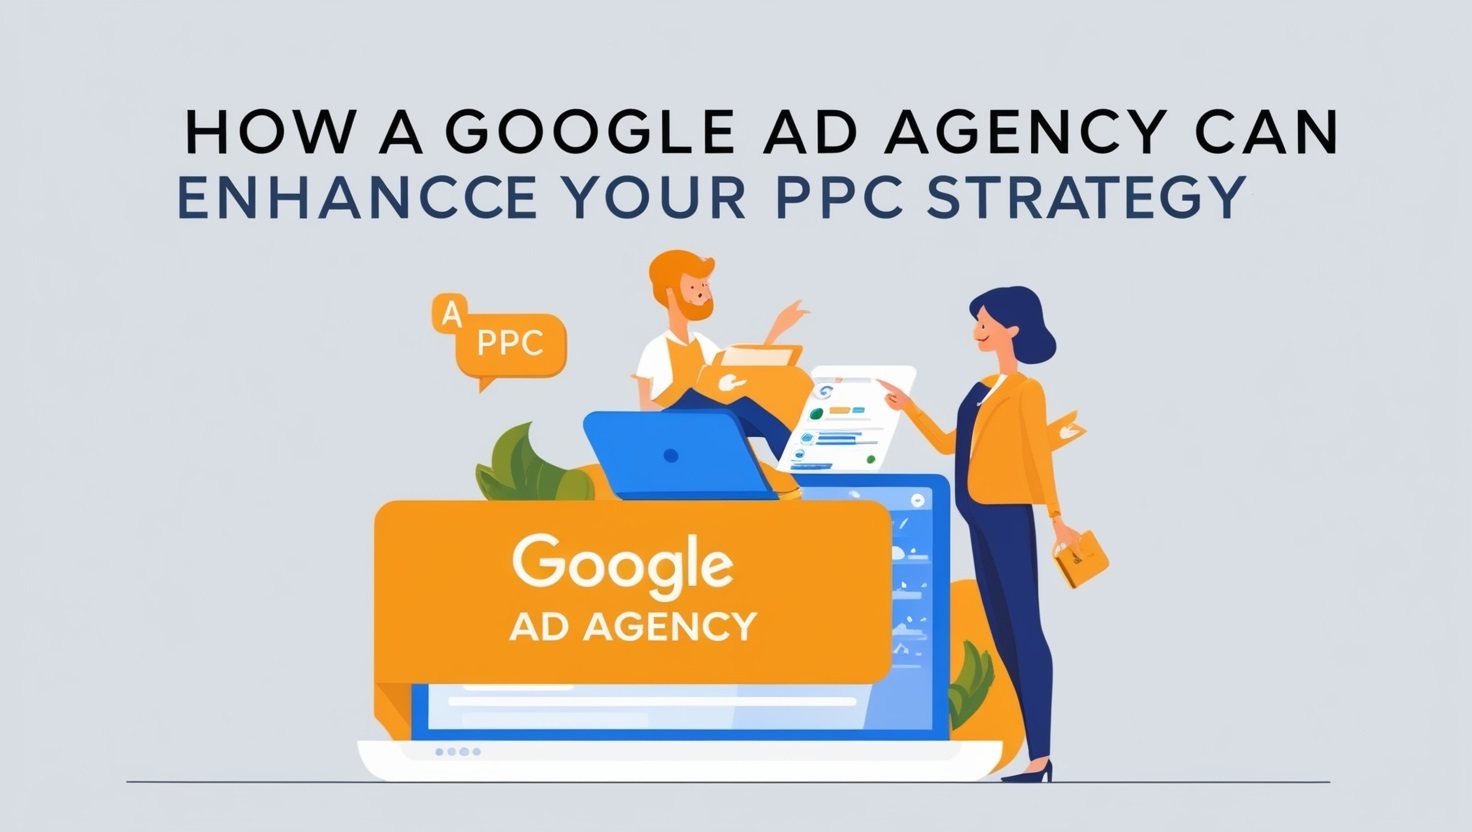 How a Google Ads Agency Can Enhance Your PPC Strategy